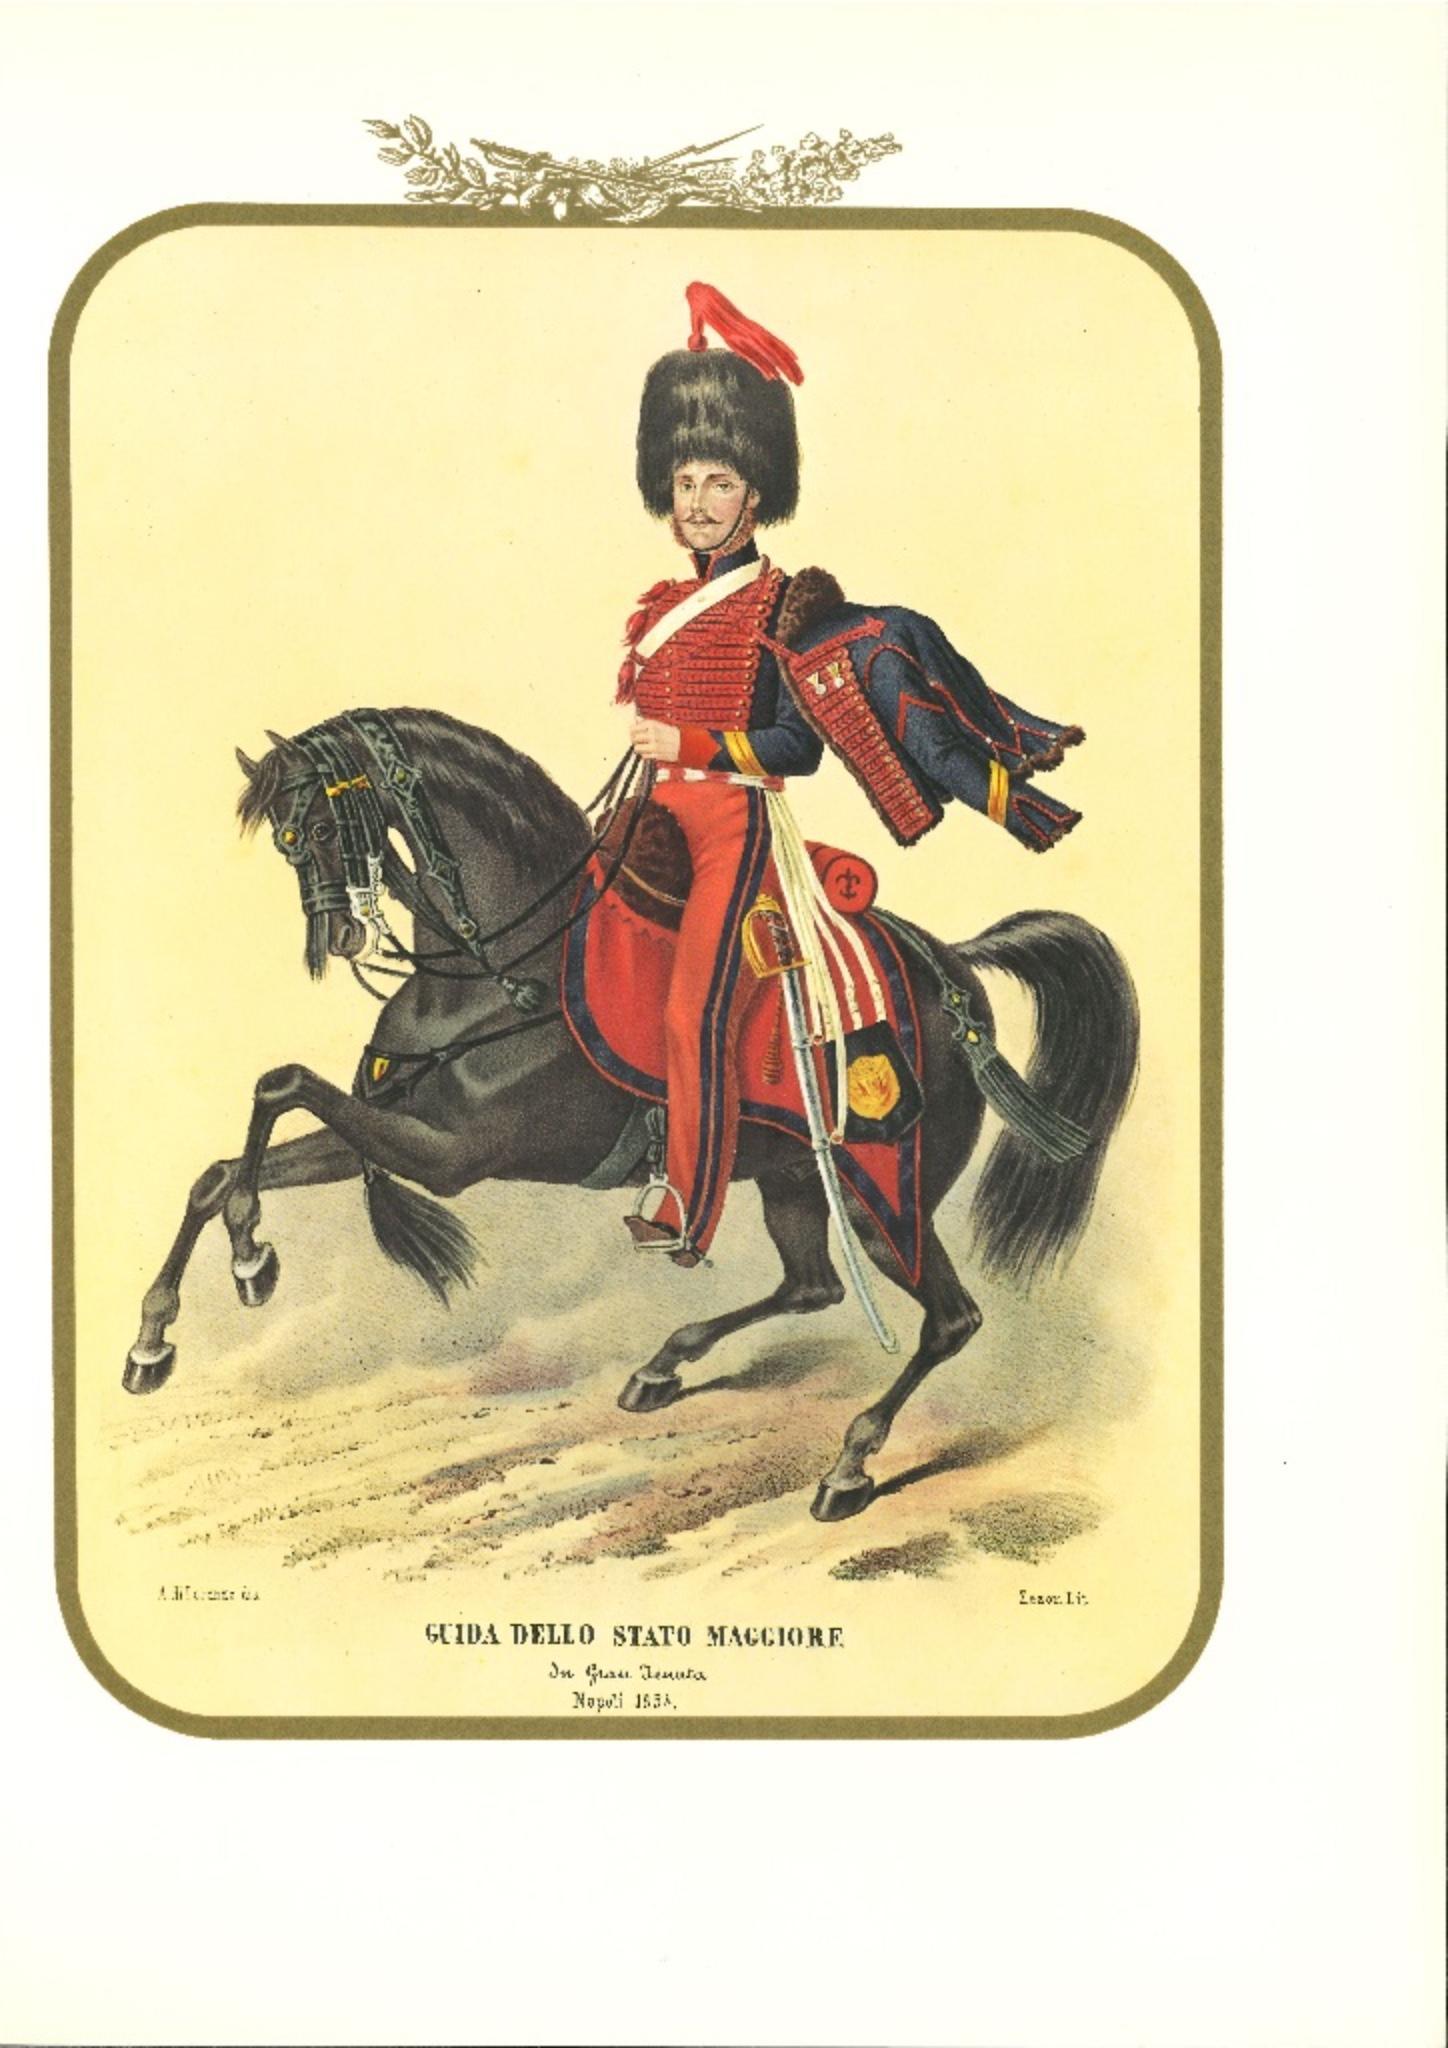 Leadership of the General Staff is a lithograph by Antonio Zezon. Naples 1854.

Interesting colored lithograph which describes a Leadership of the General Staff riding his horse, in great estate.

In excellent condition, this print belongs to one of